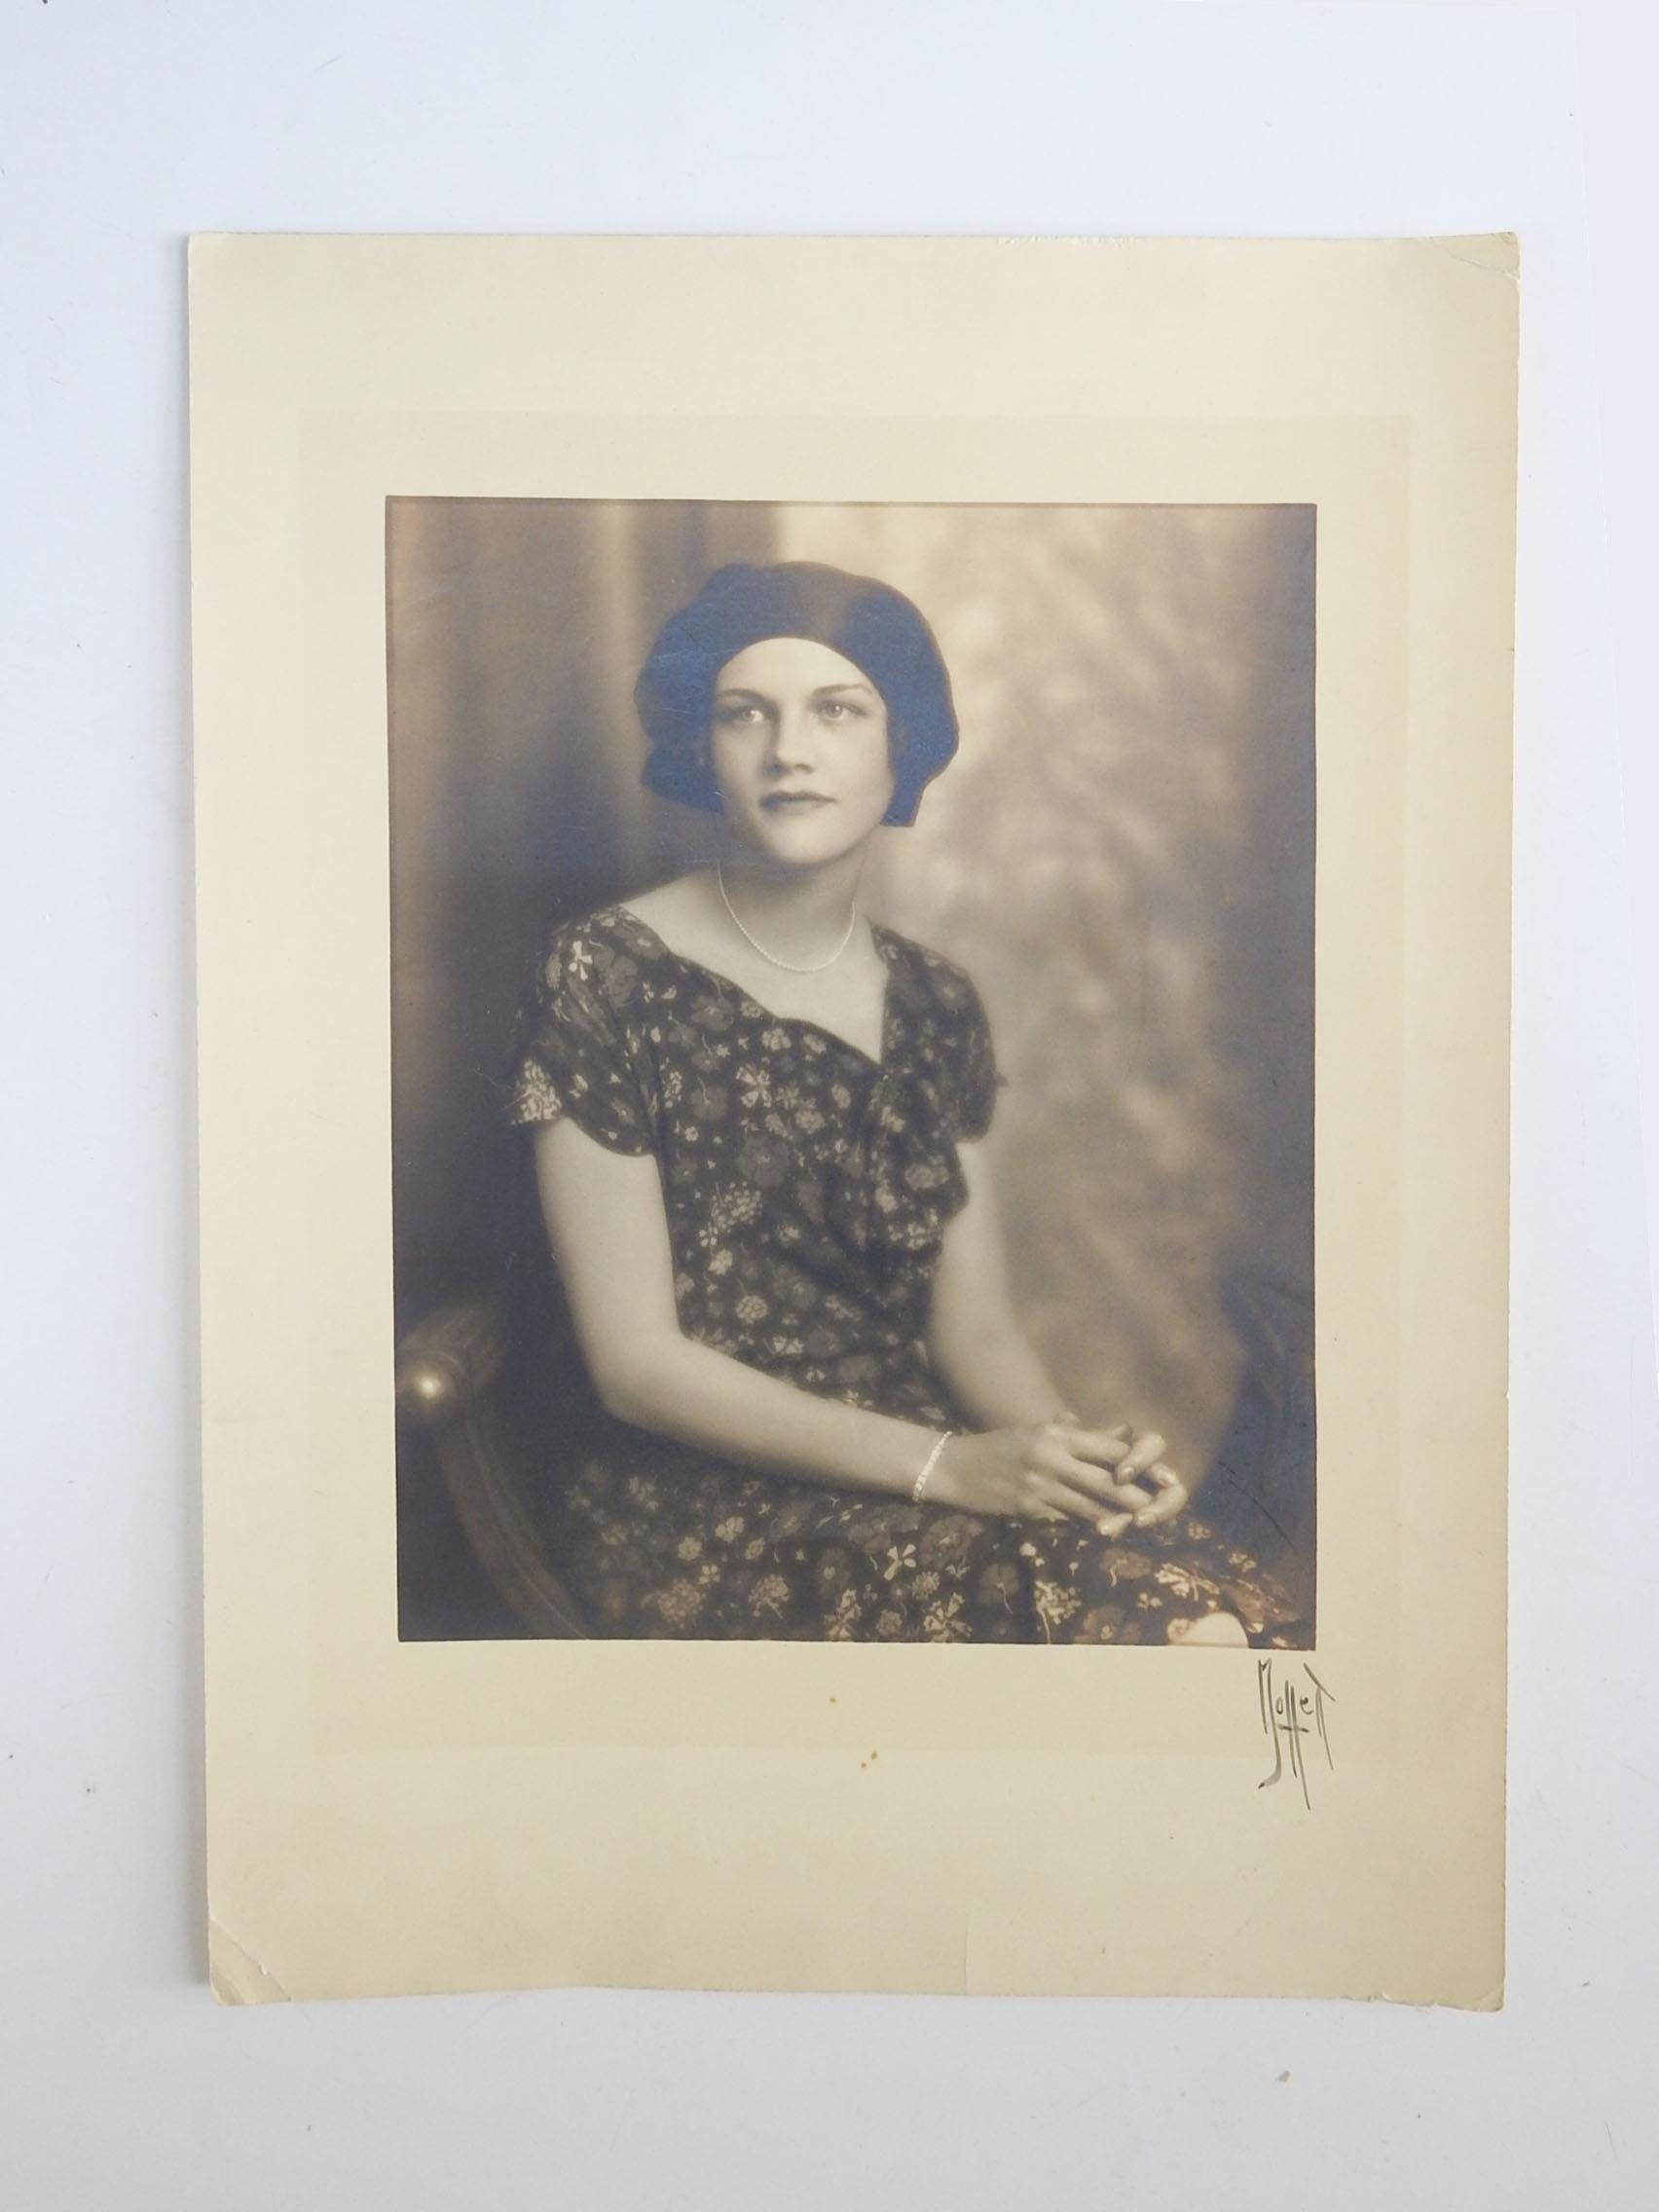 Vintage circa 1920's sepia toned portrait photograph of woman. Signed Moffett lower right margin. Unframed, small corner creases.